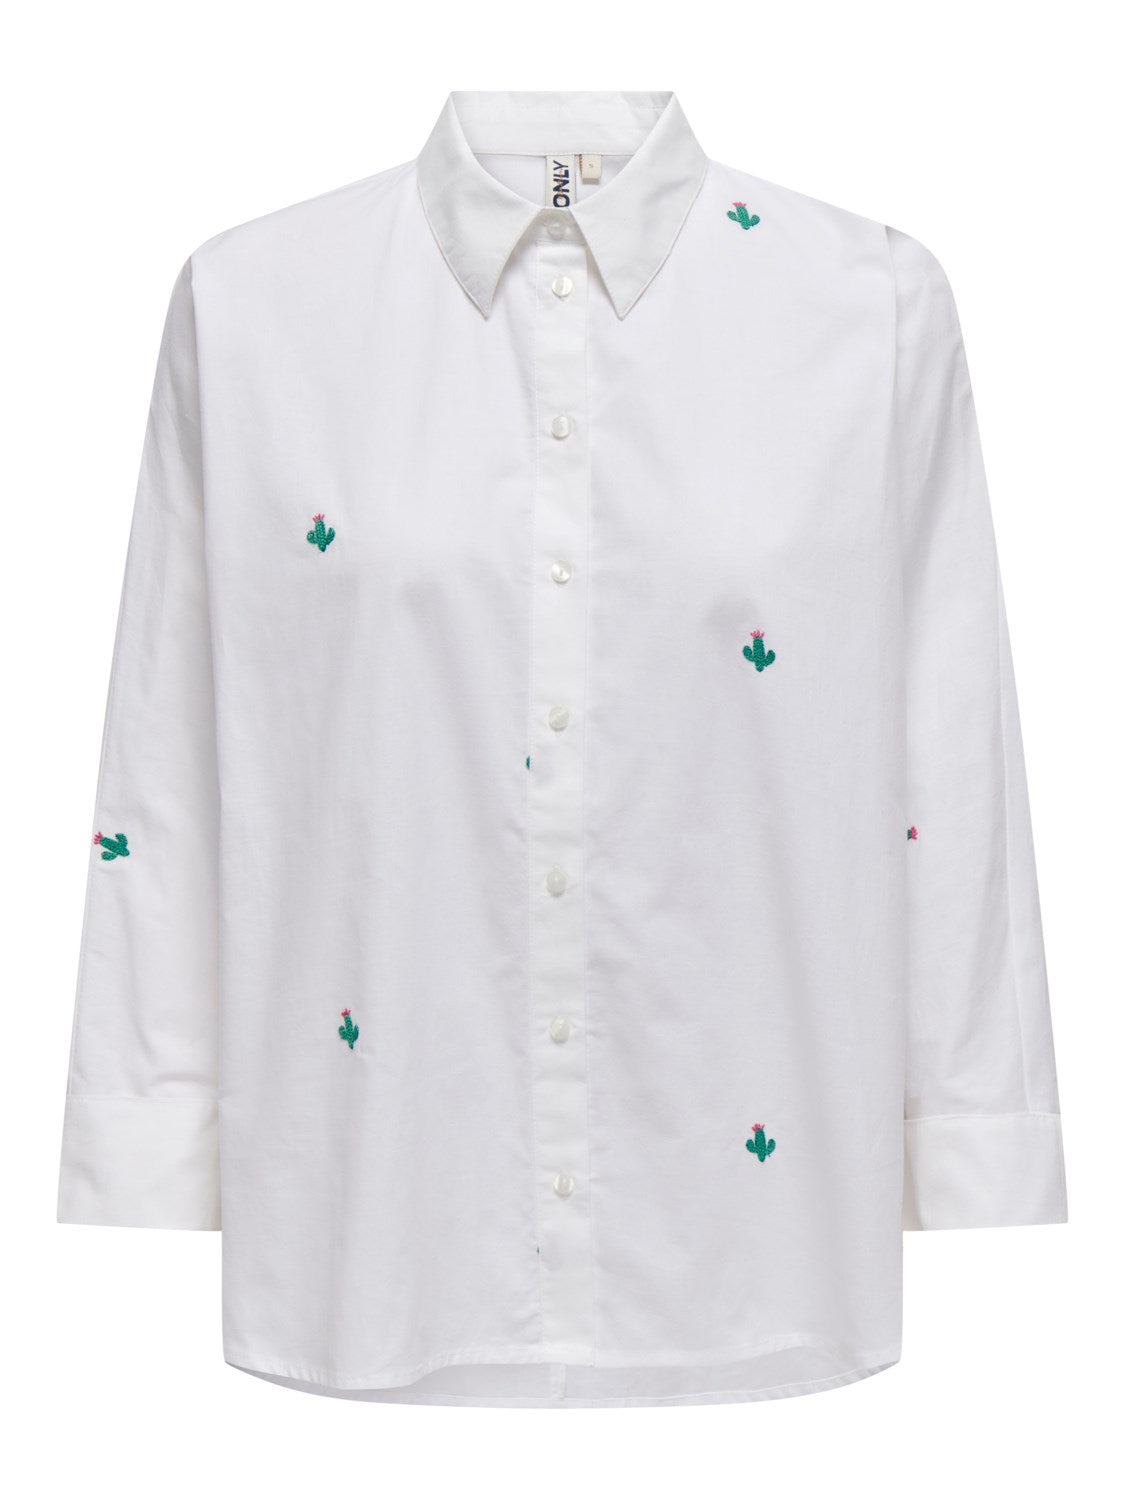 Only - White Shirt with Embroidered Cacti